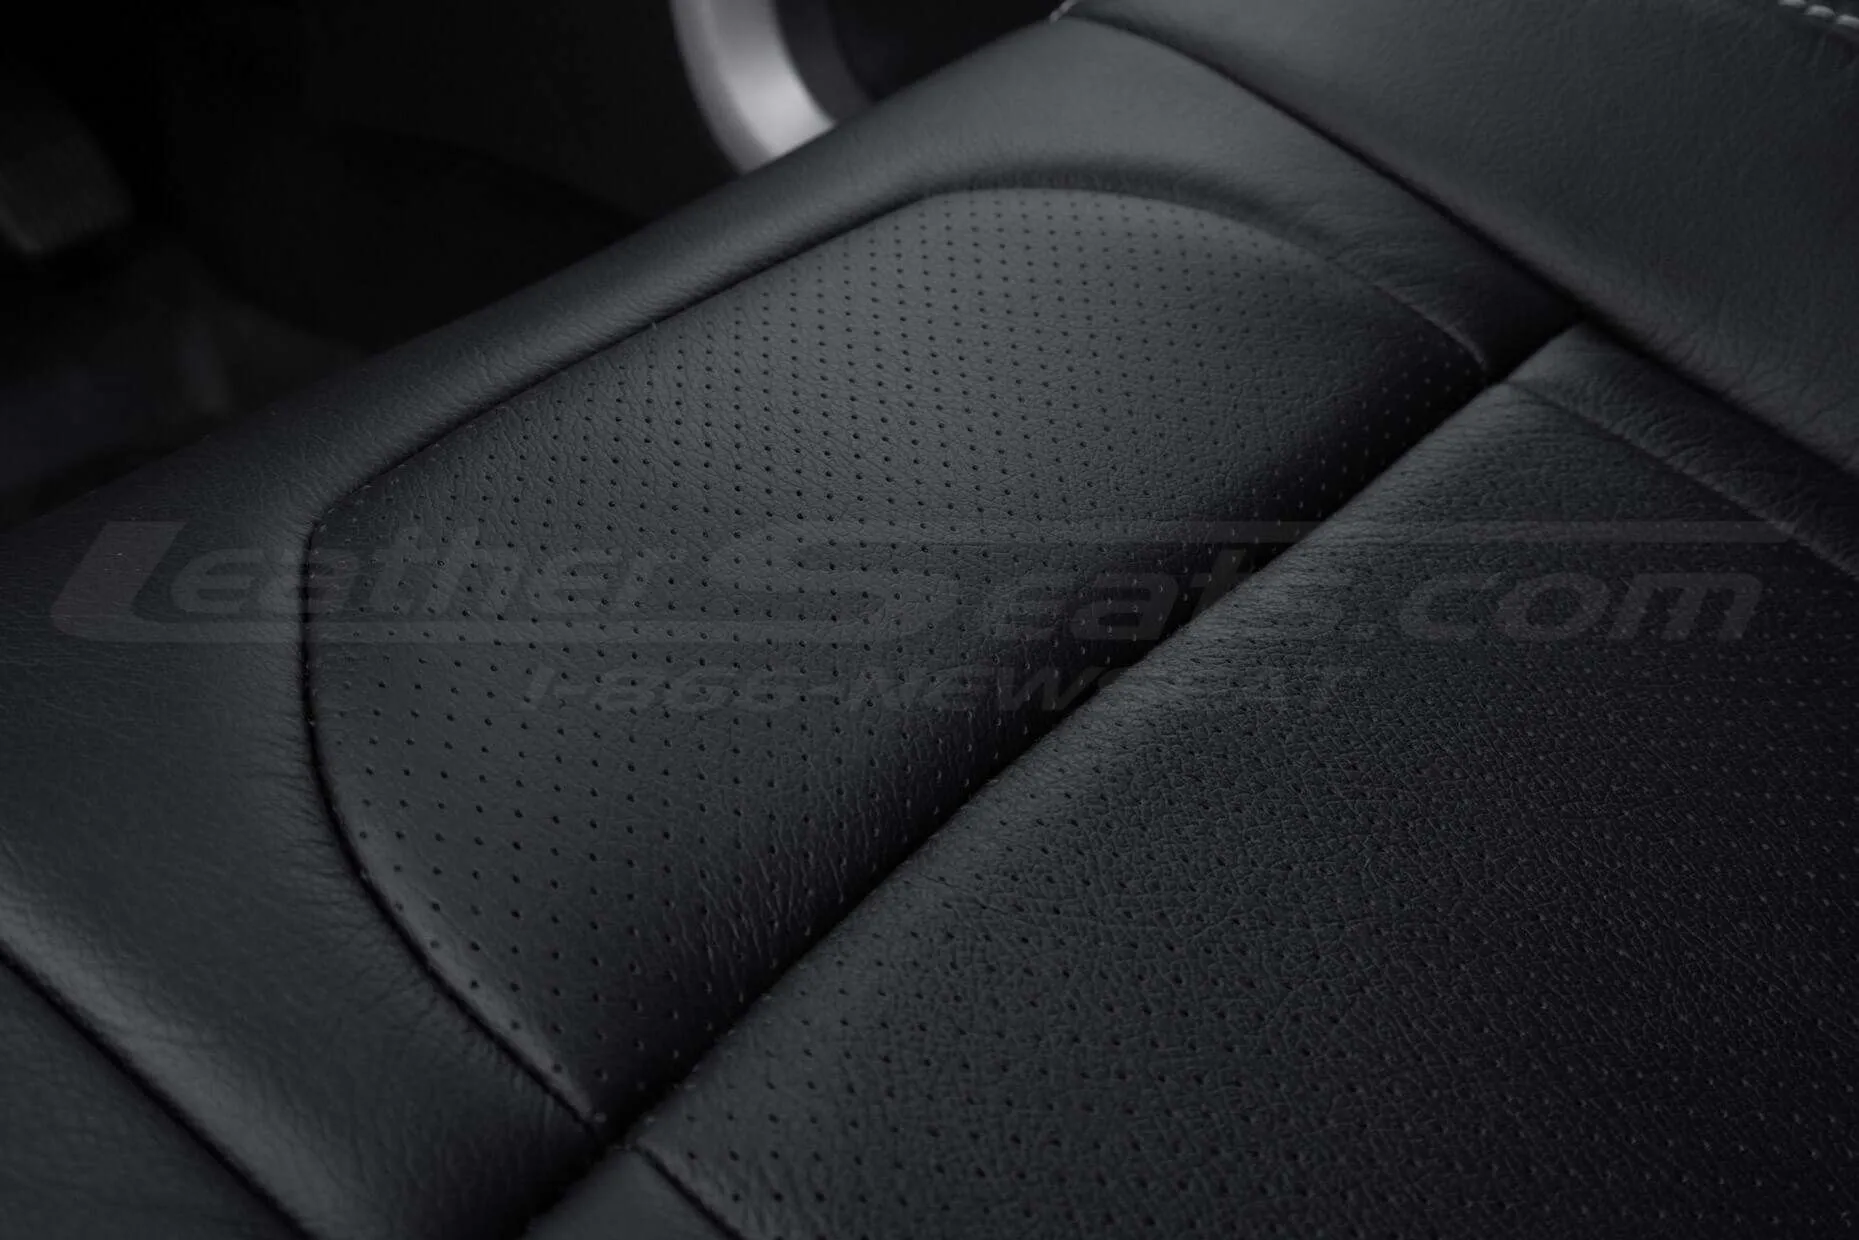 Perforated Insert section close-up on seat cushion